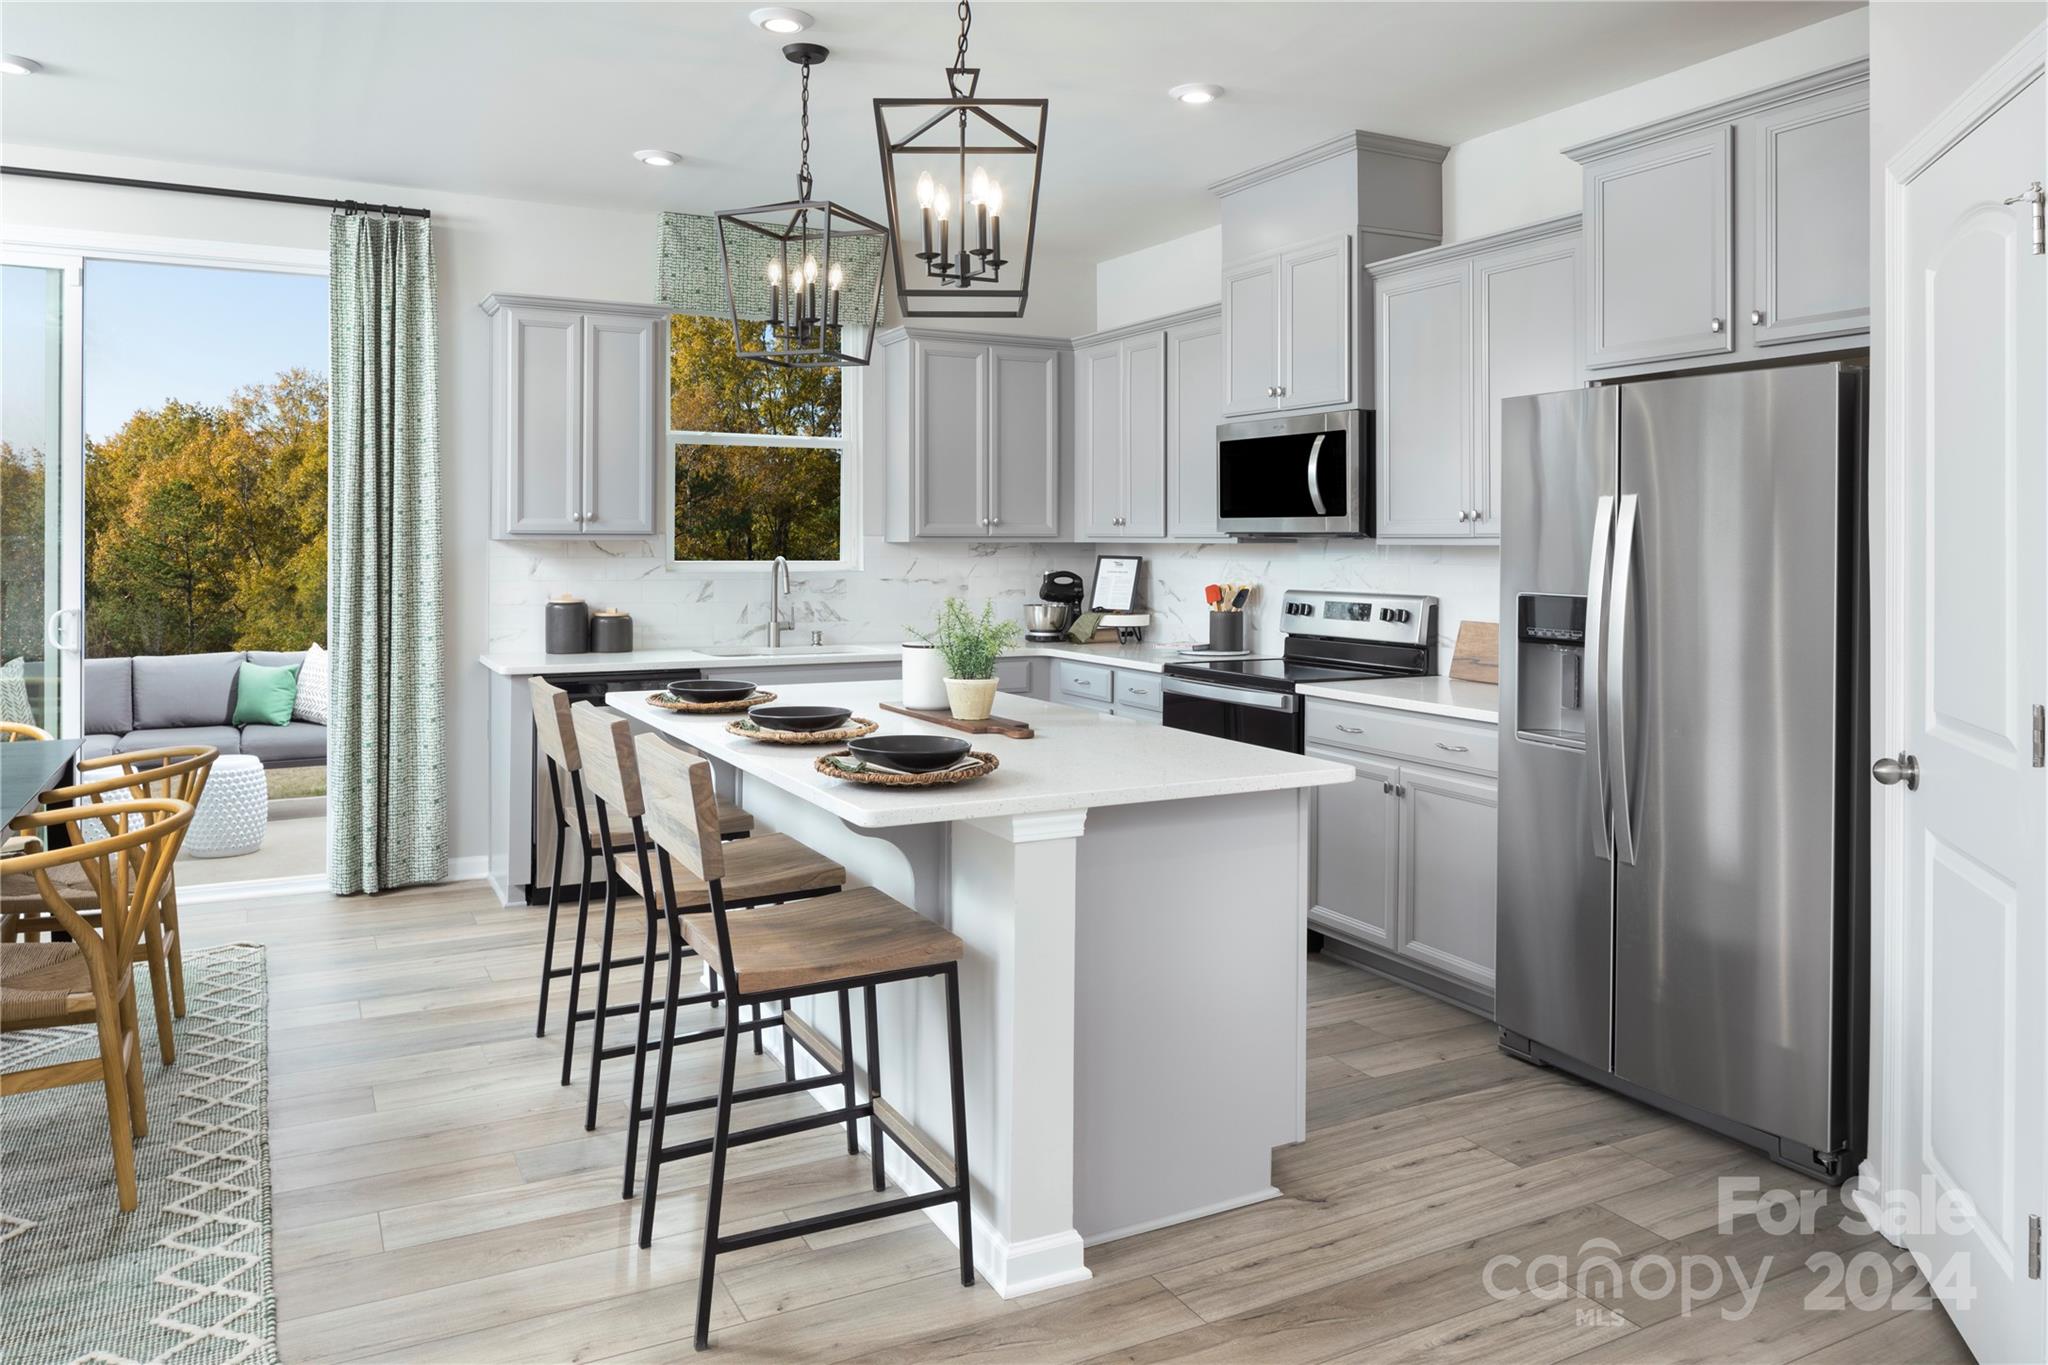 a kitchen with stainless steel appliances a table chairs refrigerator and microwave